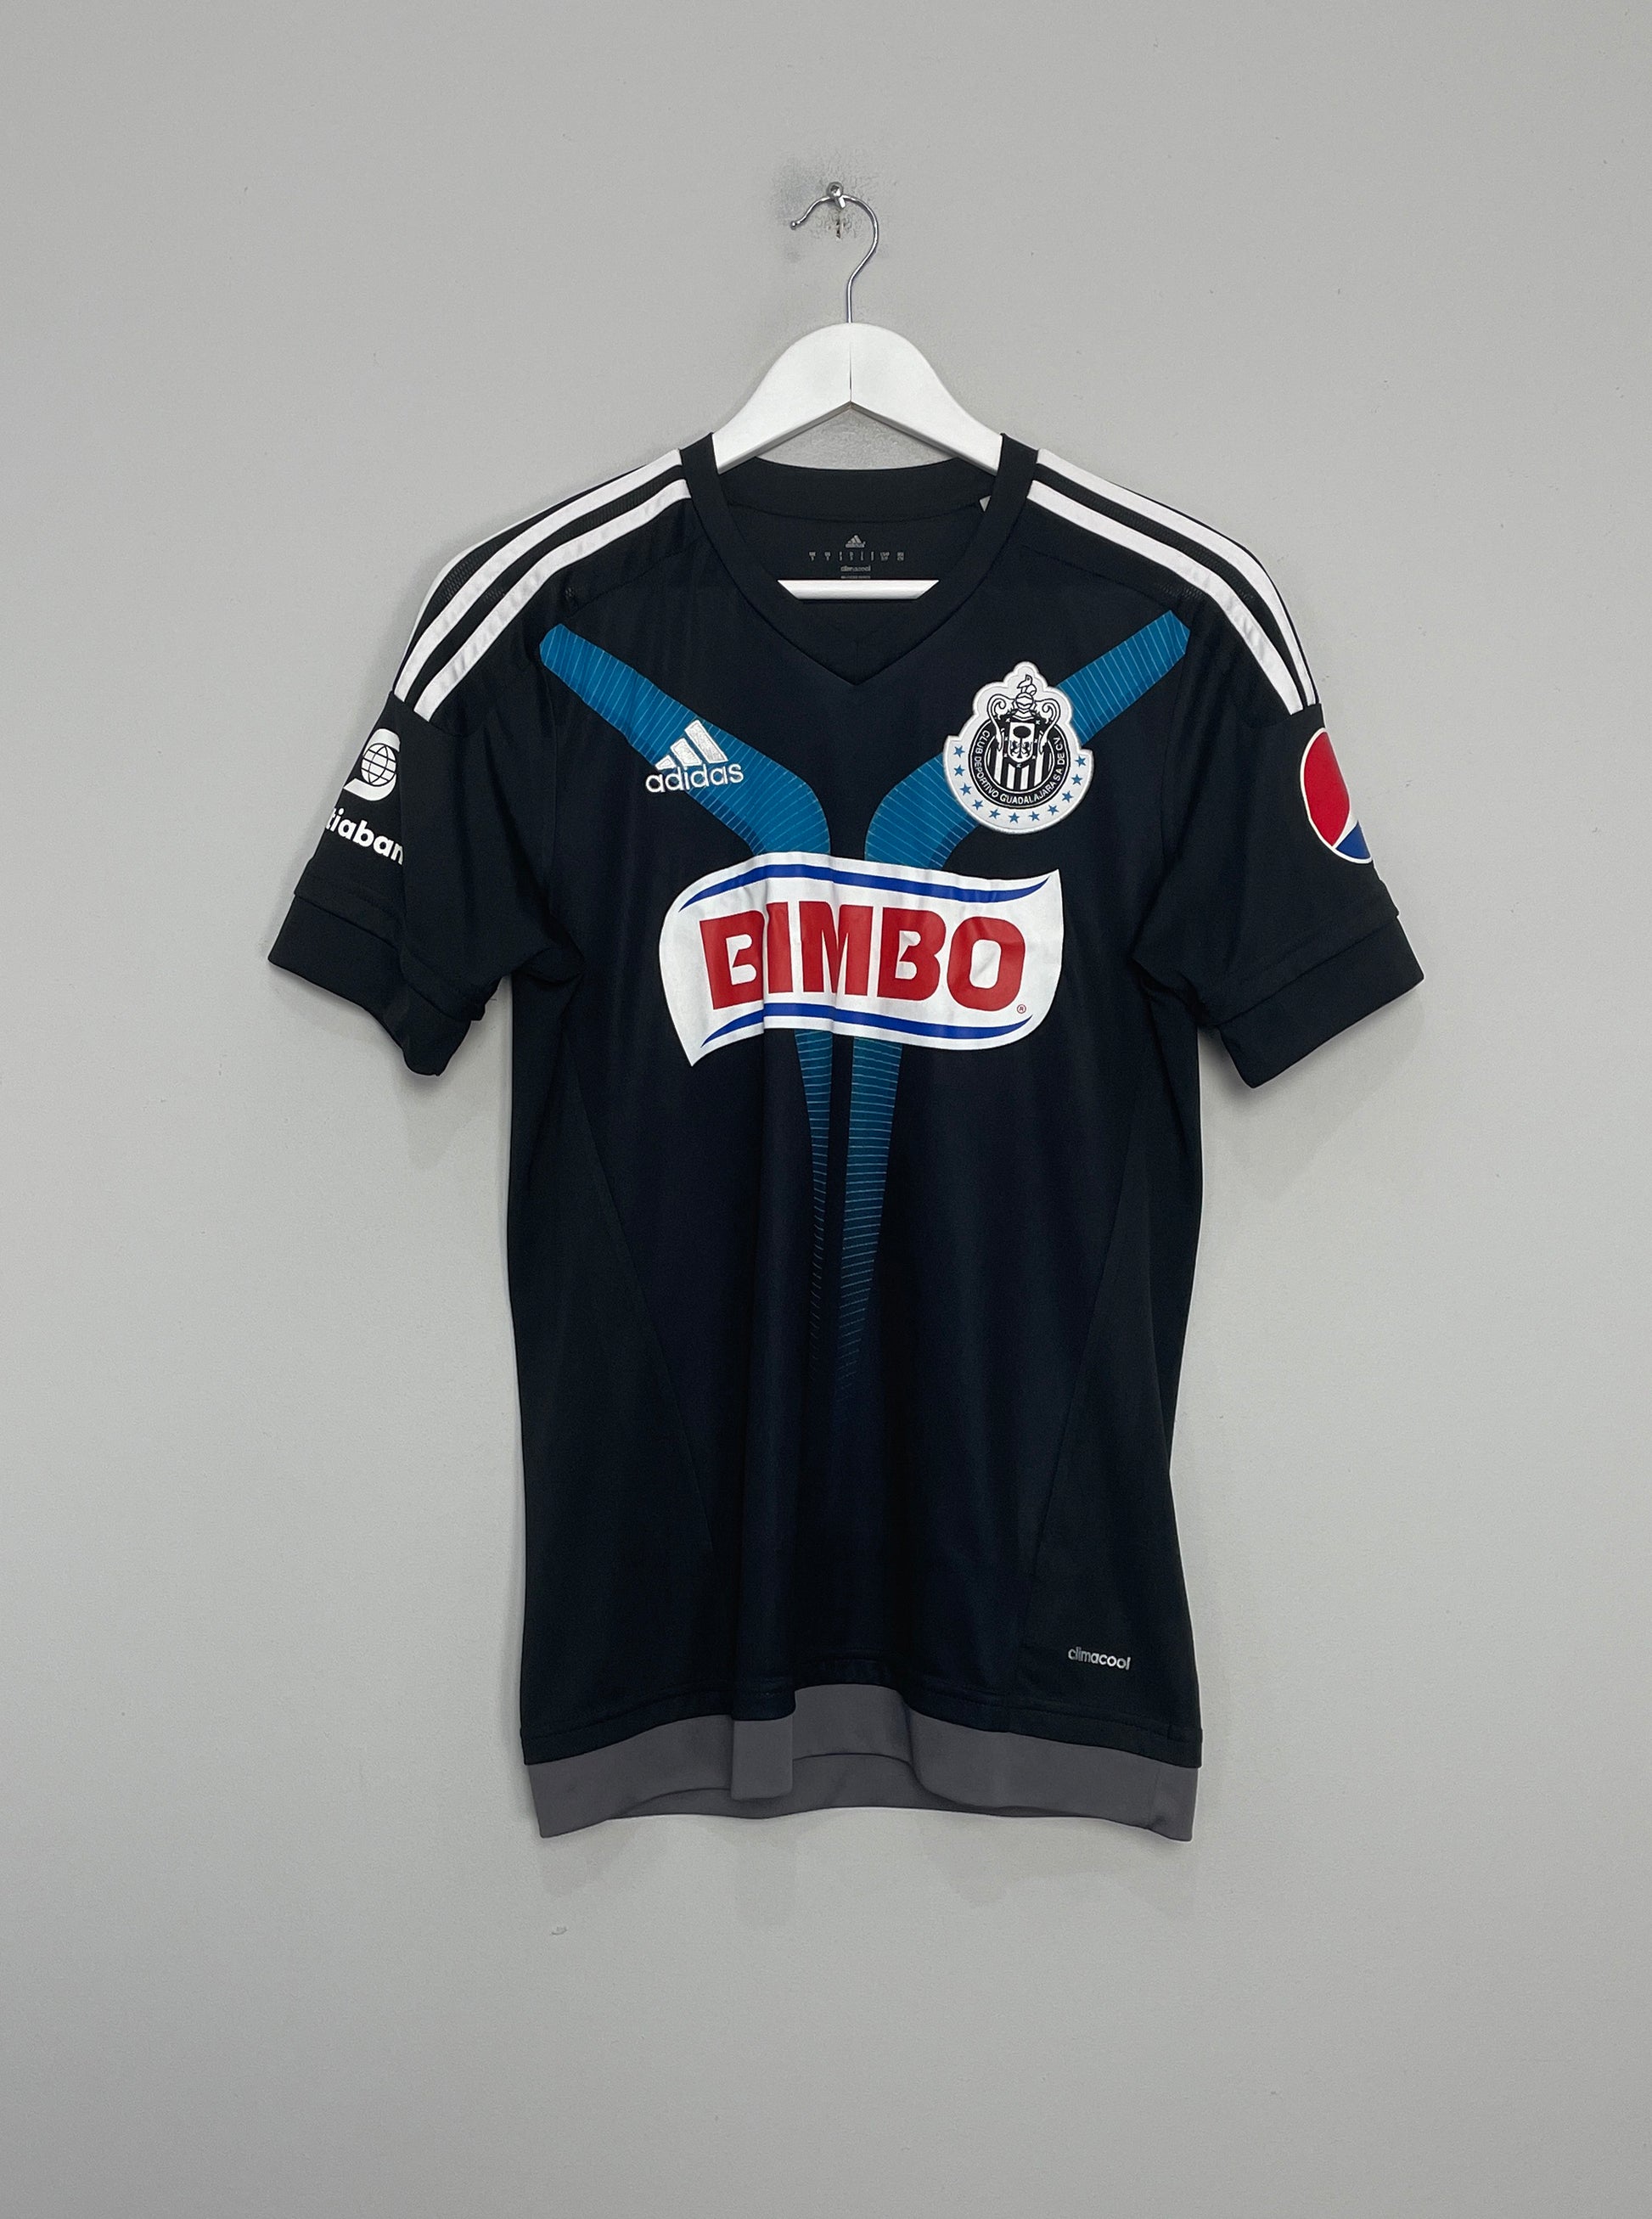 Image of the Chivas shirt from the 2014/15 season